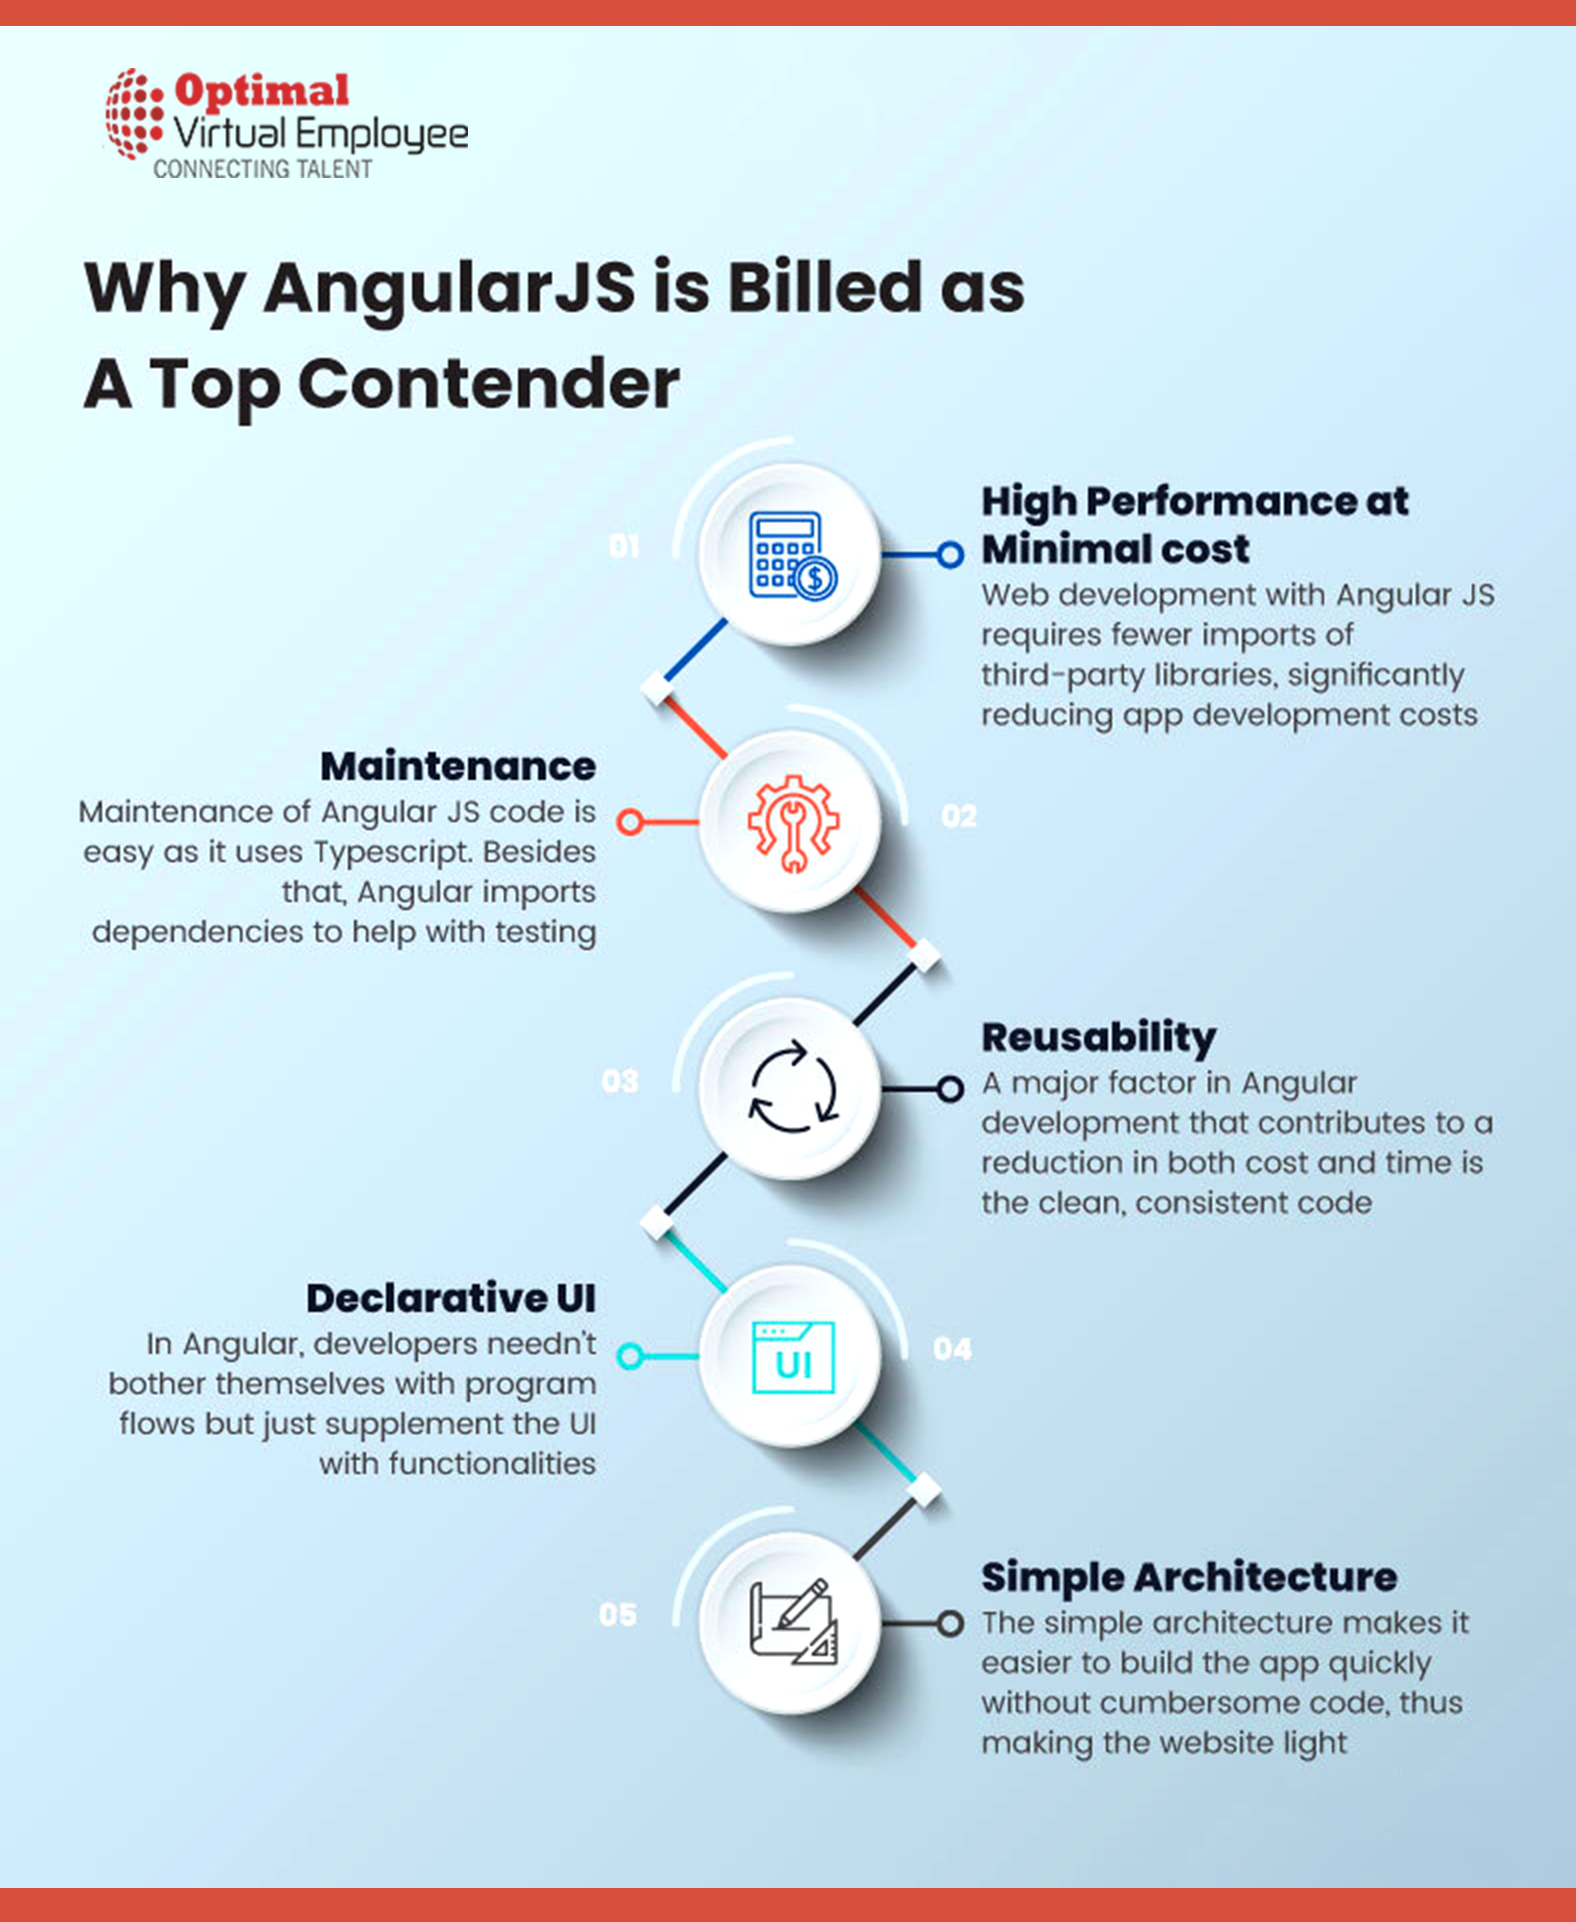 Why is Angular the preferred choice for large-scale apps with complex functionalities looking to scale further